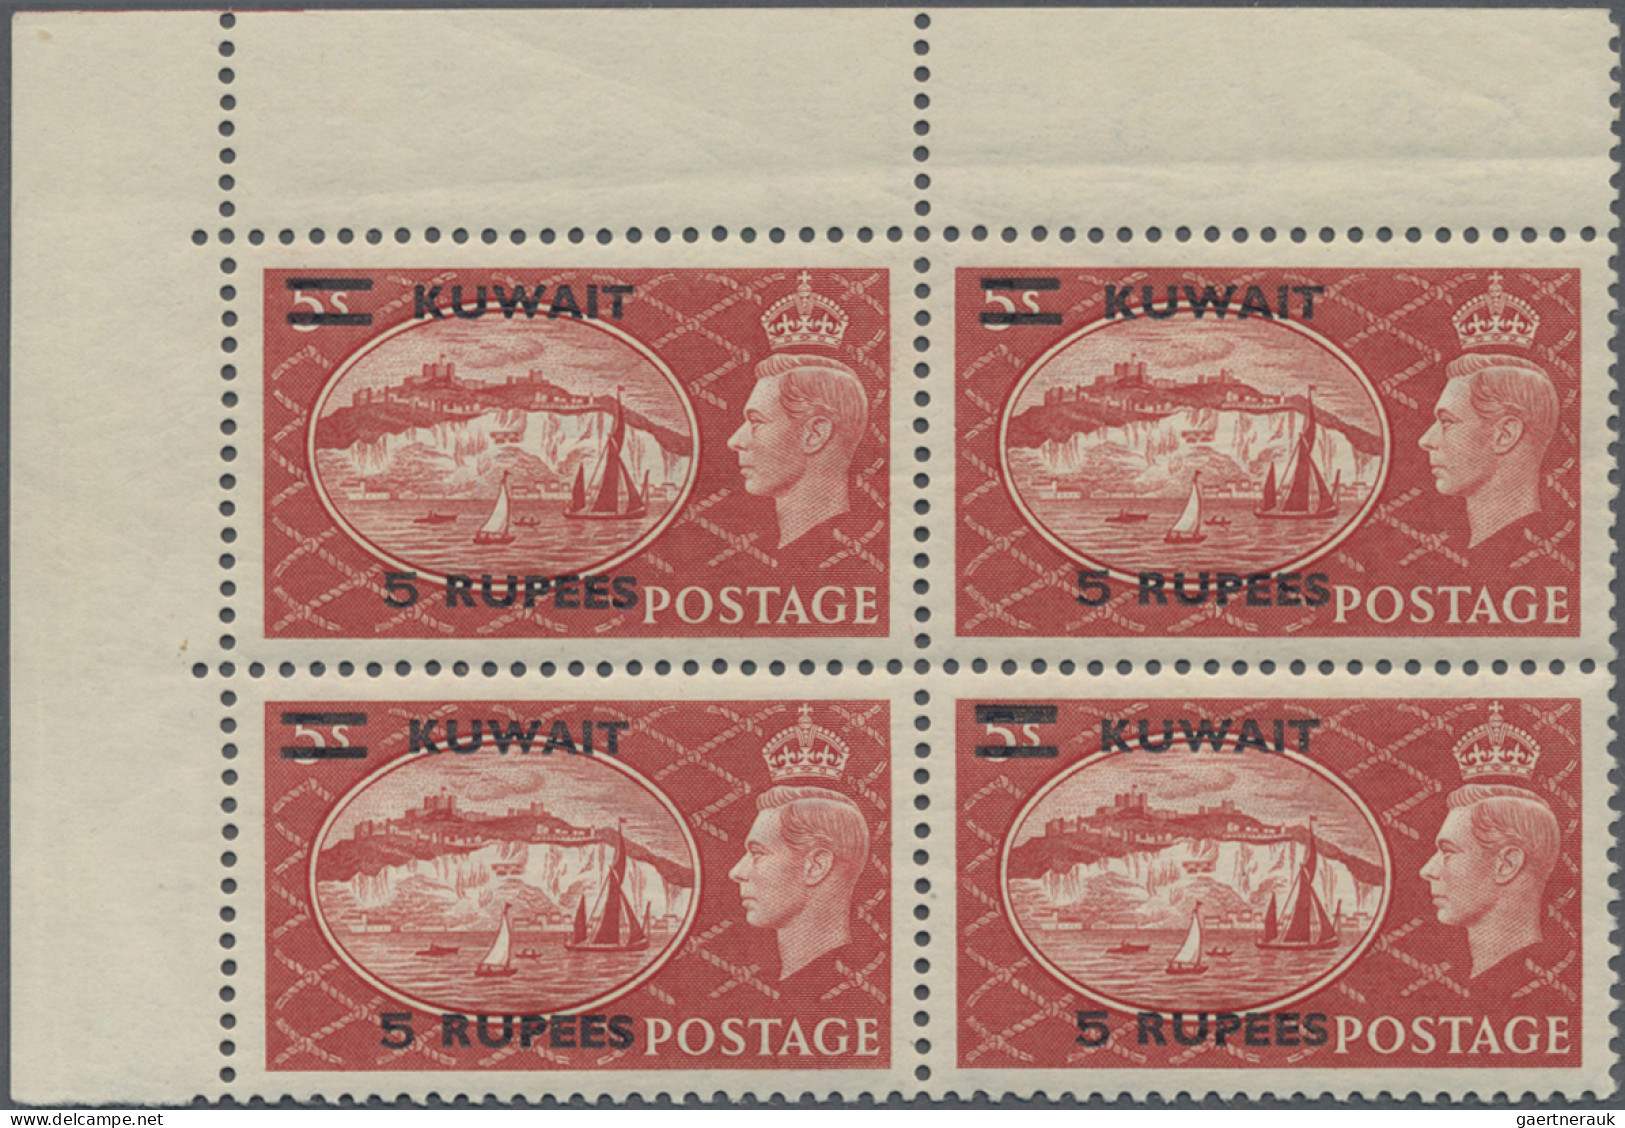 Kuwait: 1951 5r. On 5s. Red Showing Variety "Extra Bar At Top" Along With Normal - Kuwait